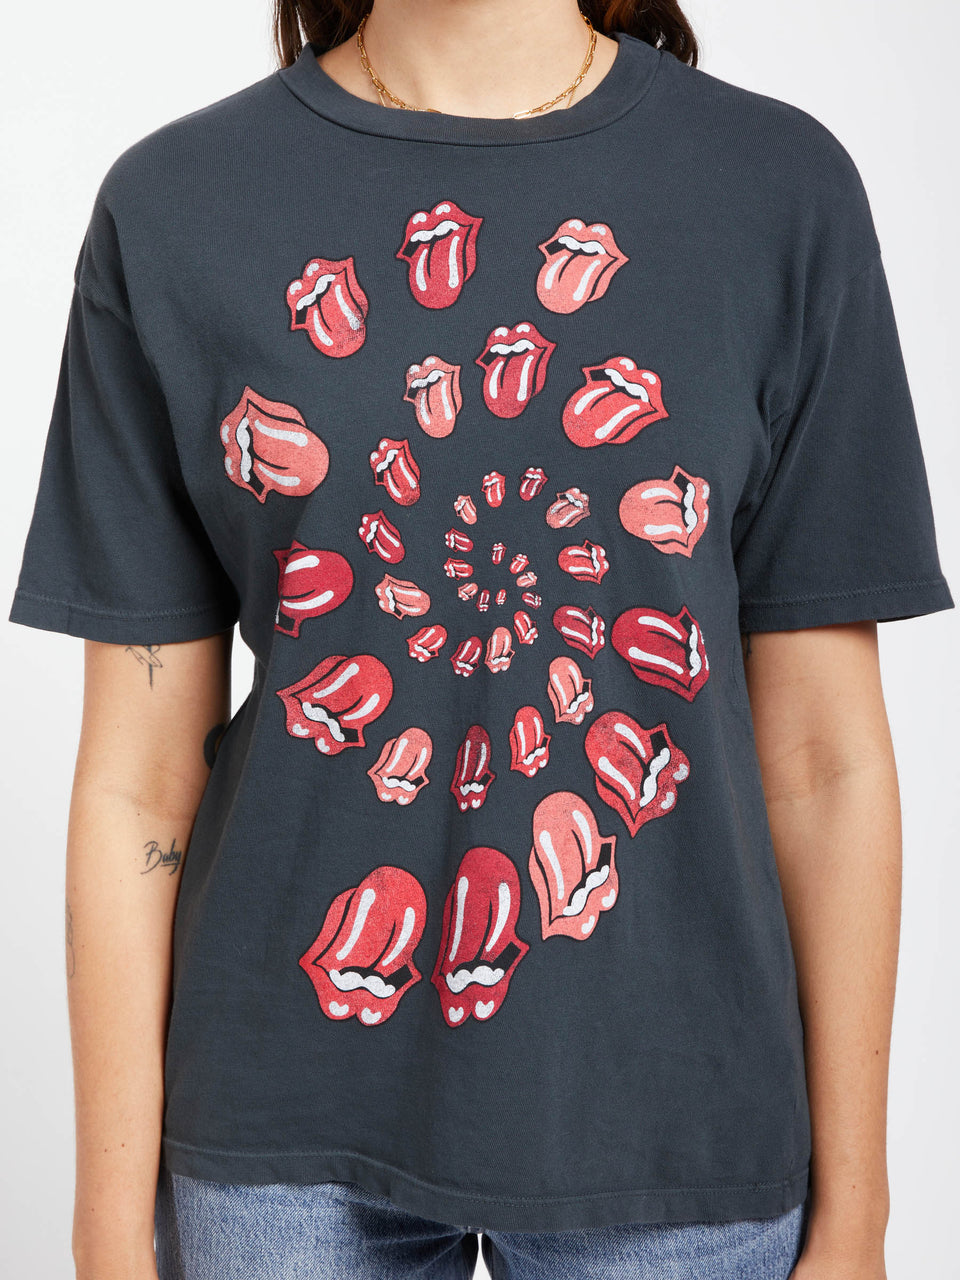 Daydreamer_Rolling_Stones_Spiral_Tongue_Tee_Vintage_Black